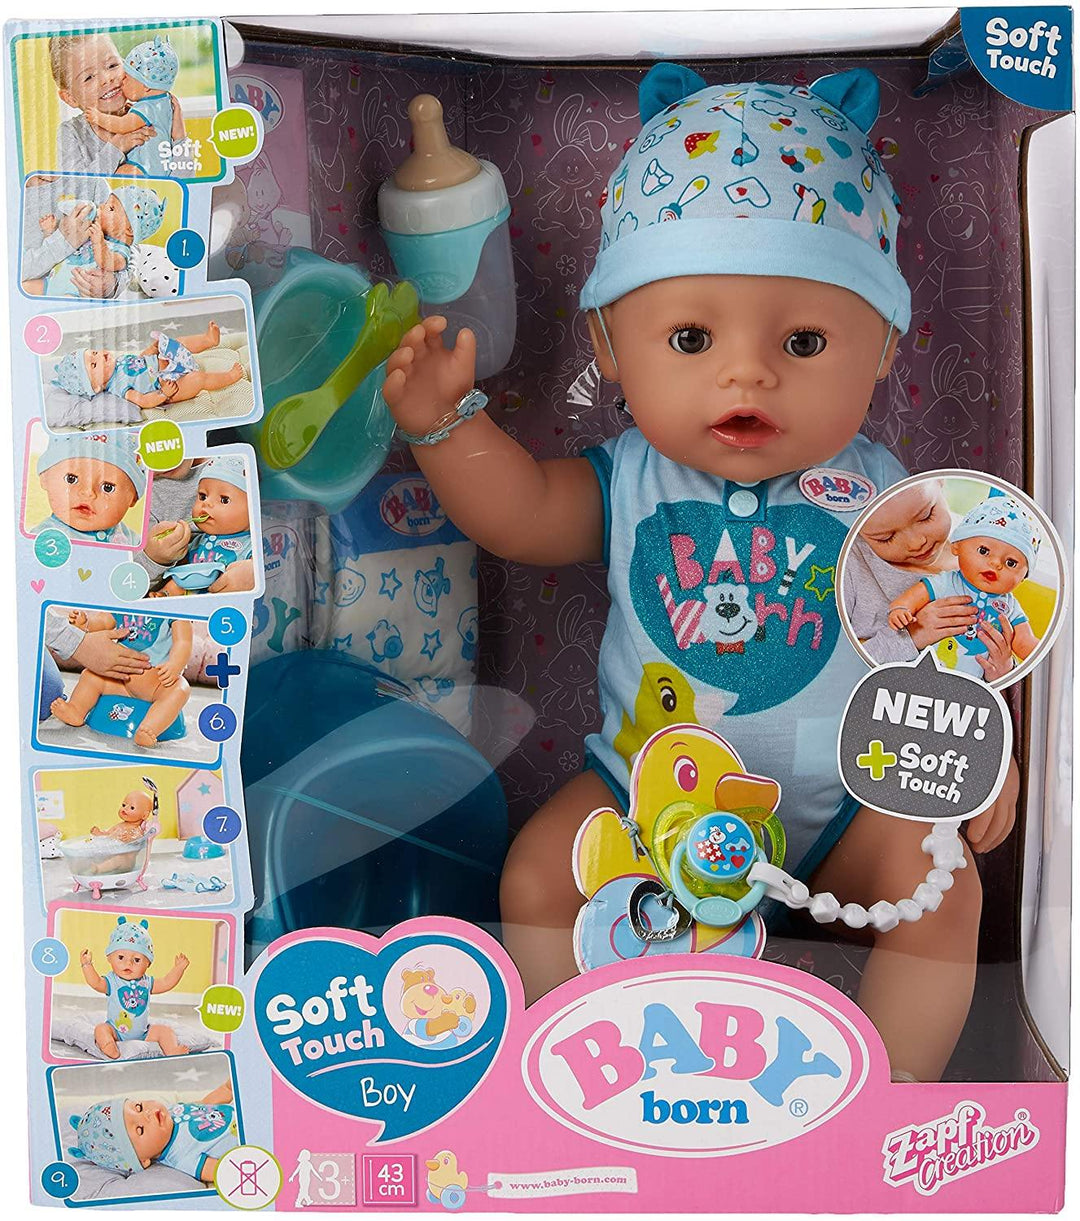 Baby Born 824375 Soft Touch Boy Interactive Function Doll - Yachew